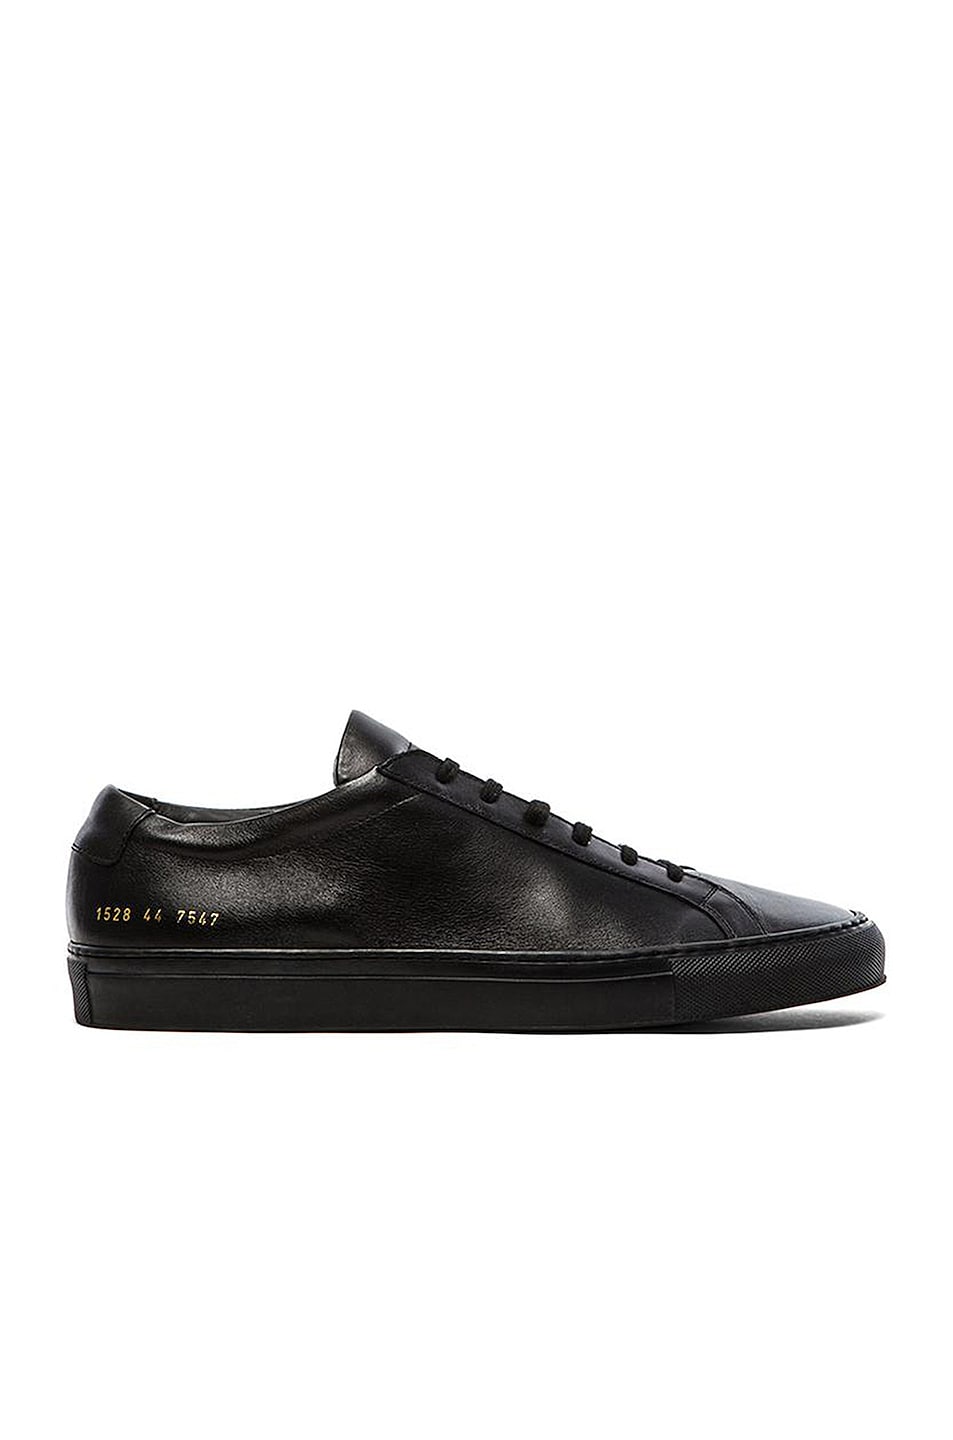 Common Projects Original Leather Achilles Low in Black | FWRD